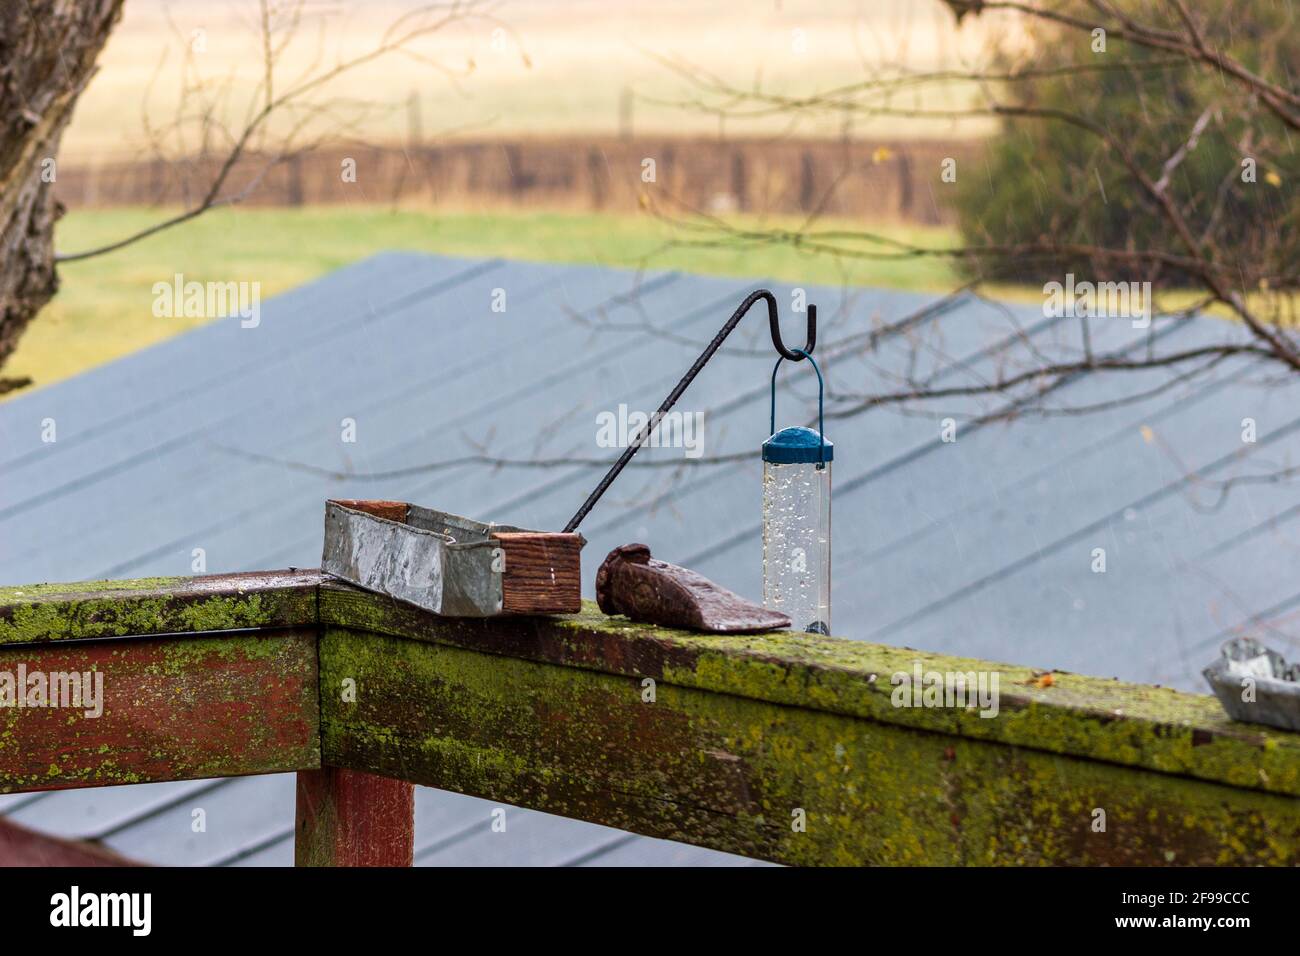 A rustic homemade bird feeder perches next to a well used splitting wedge on a lichen covered deck rail with a hanging bird feeder in the background. Stock Photo